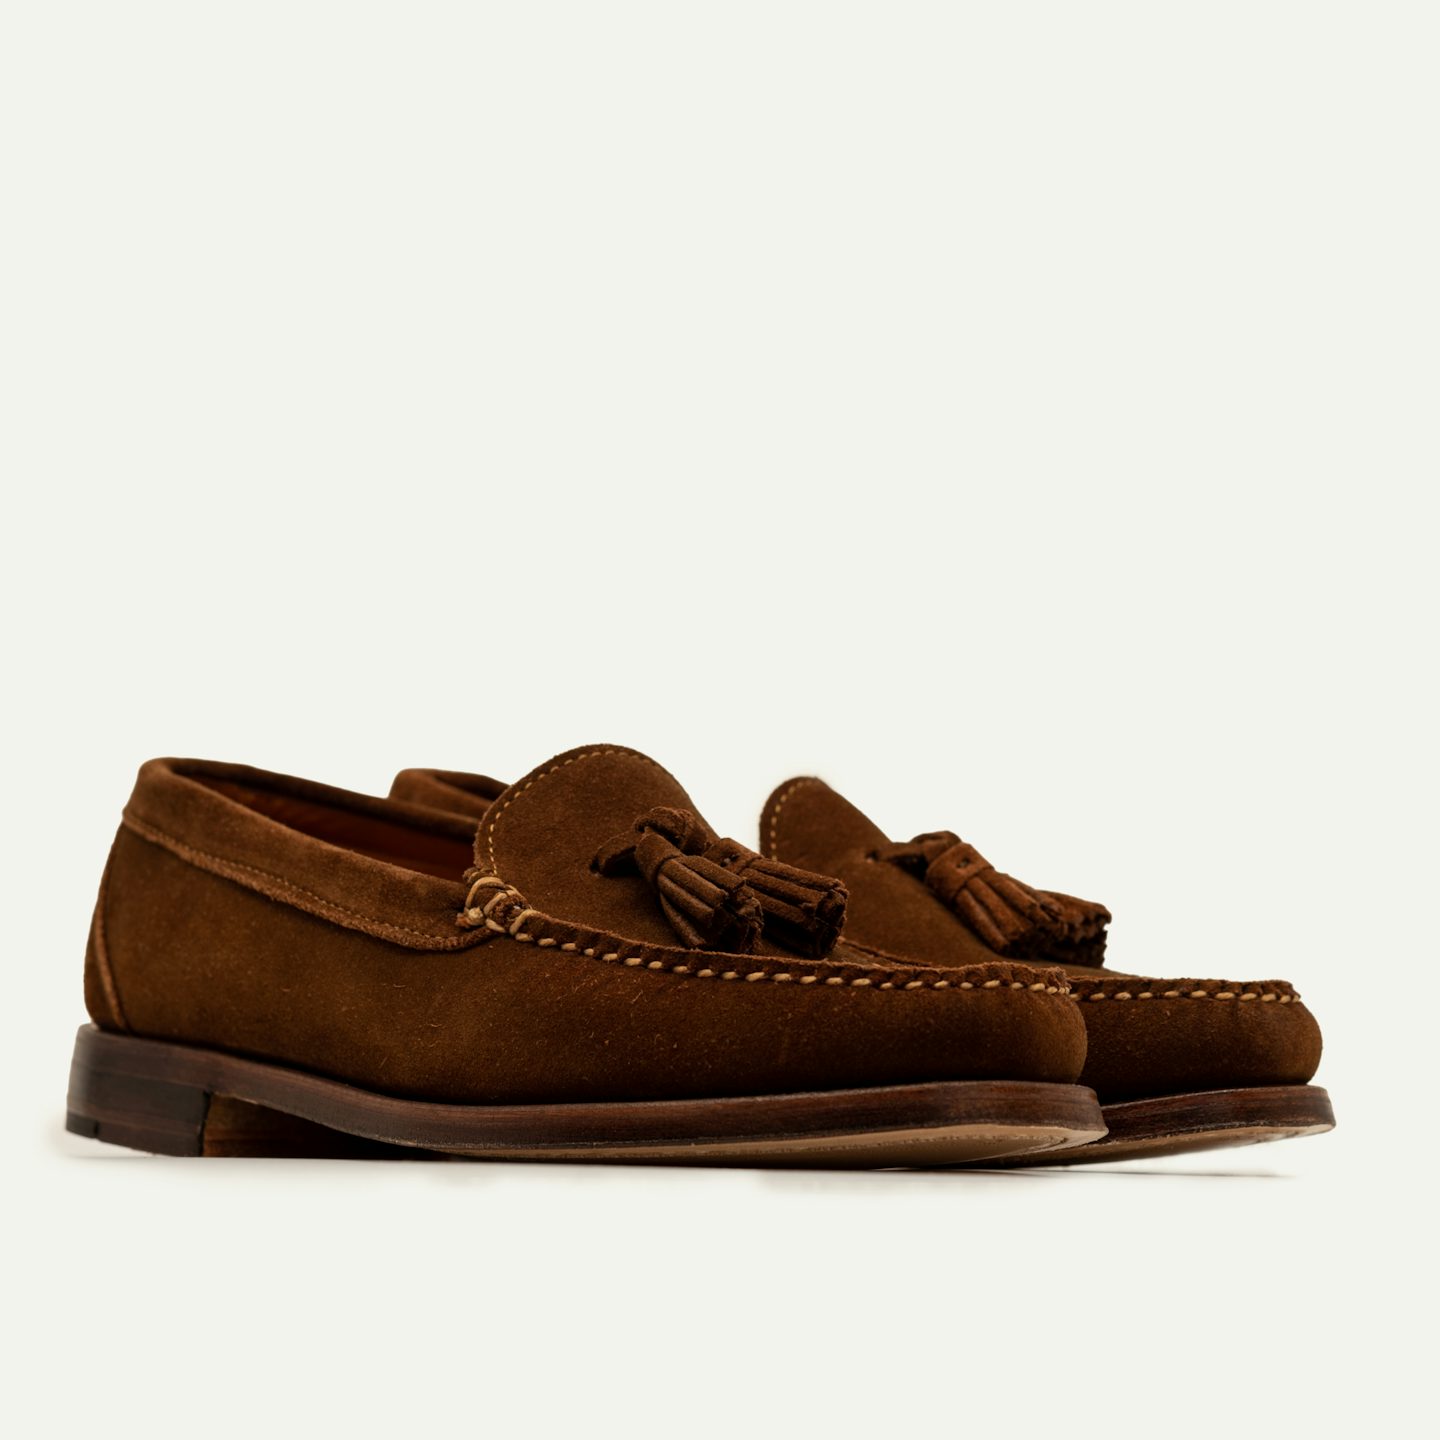 Tassel Loafer - Snuff Repello Suede, Leather Sole with Dovetail Toplift -  Made in USA | Oak Street Bootmakers